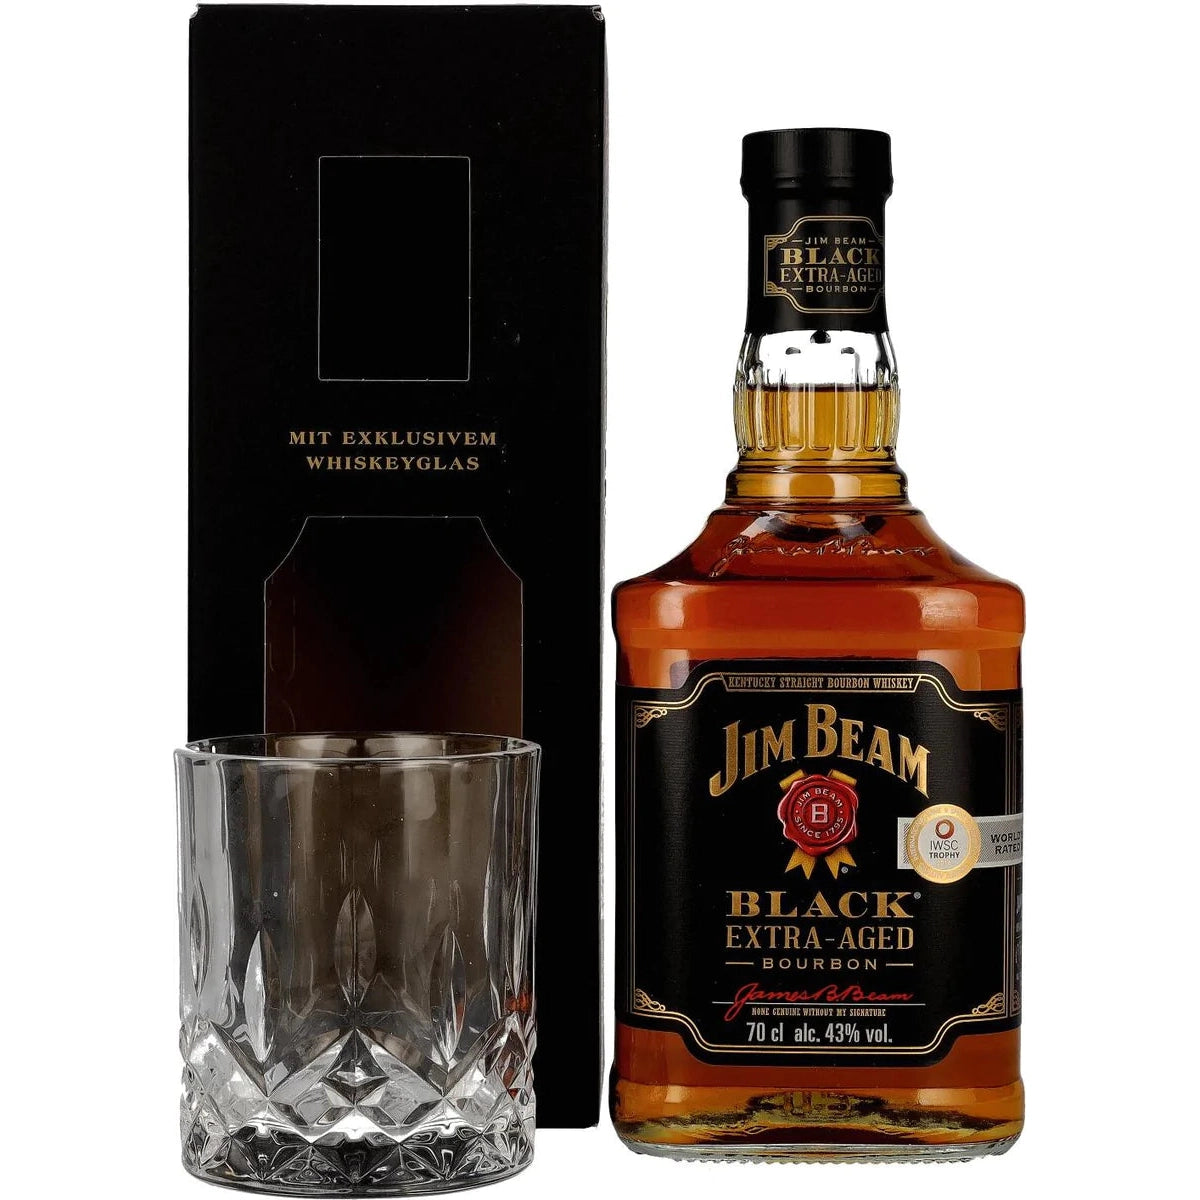 0,7l 43% Bourbon Giftbox glass Vol. in with BLACK Extra-Aged Jim Beam